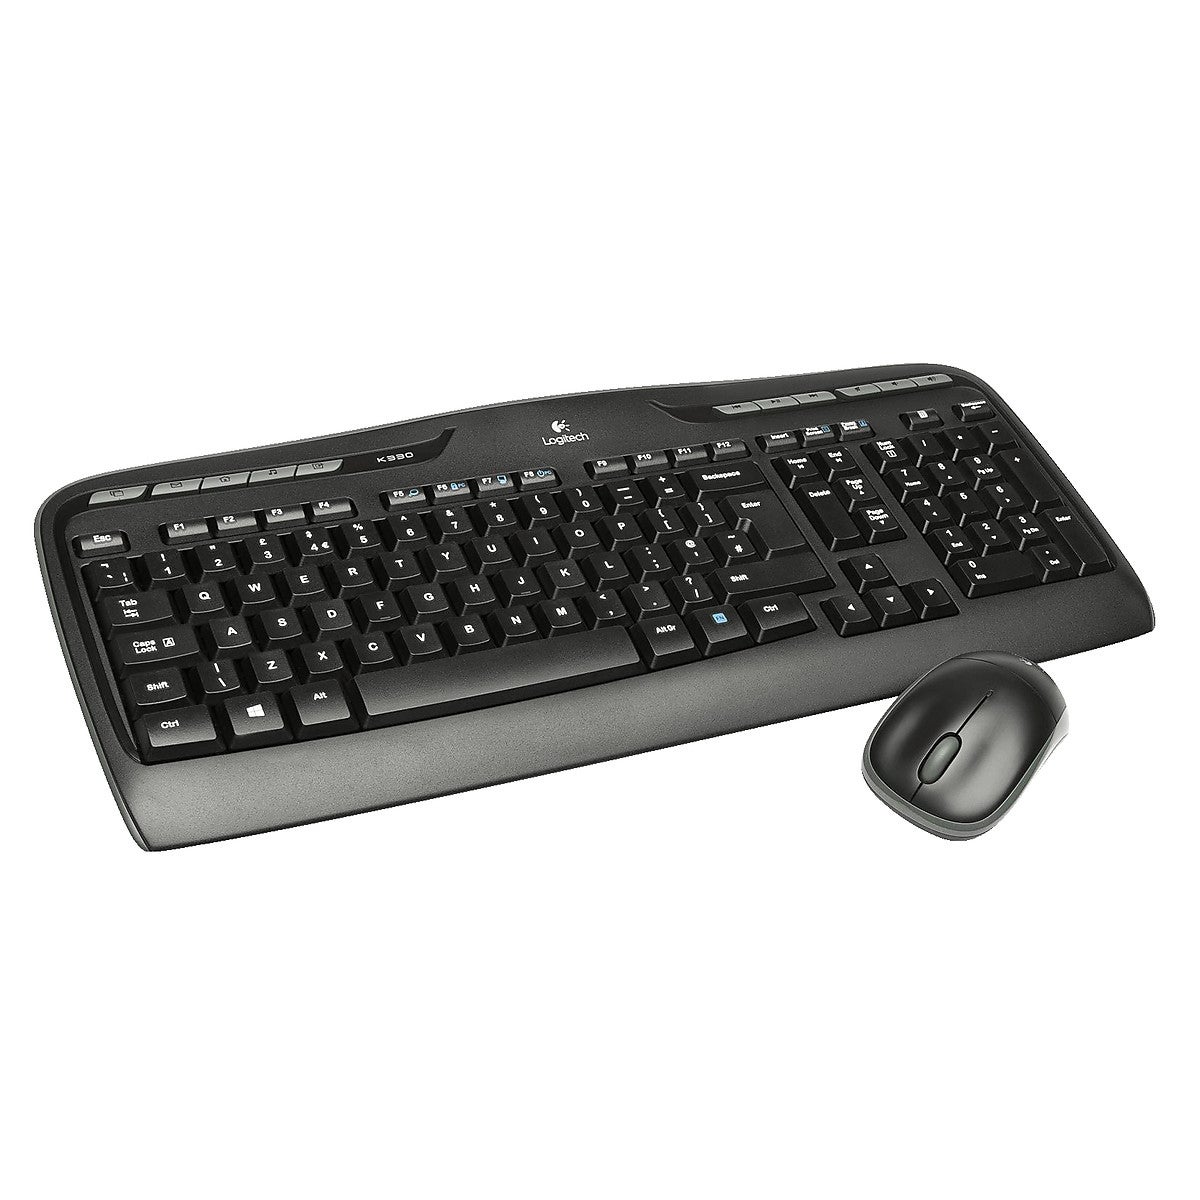 connect logitech wireless keyboard and mouse